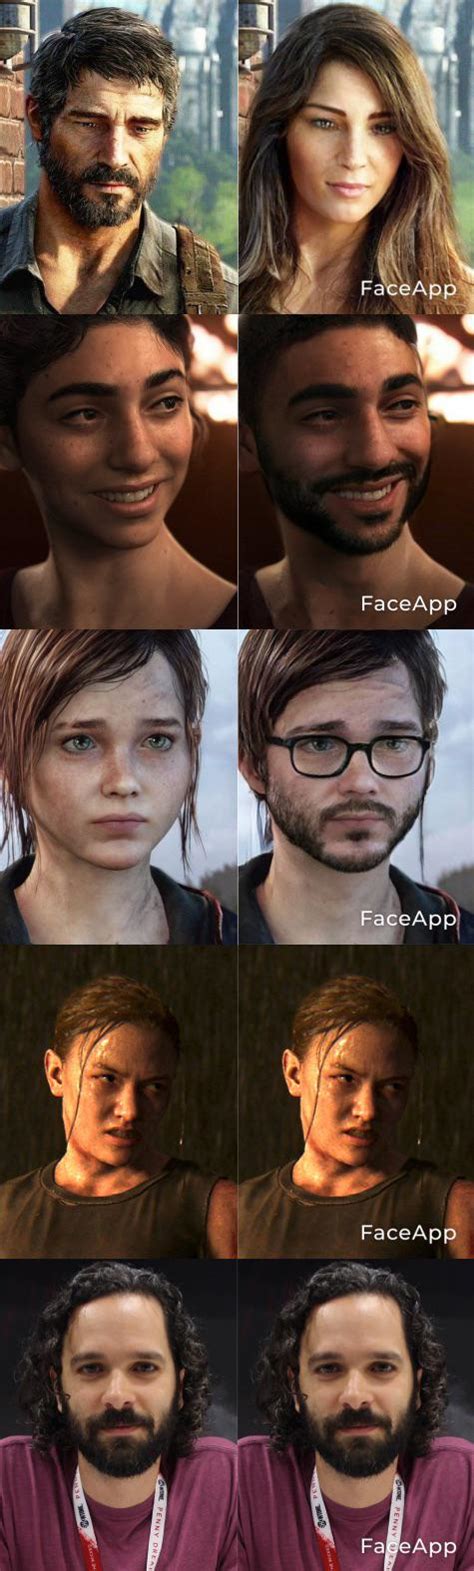 I Ran Characters From The Tlou2 Through Faceapp To See